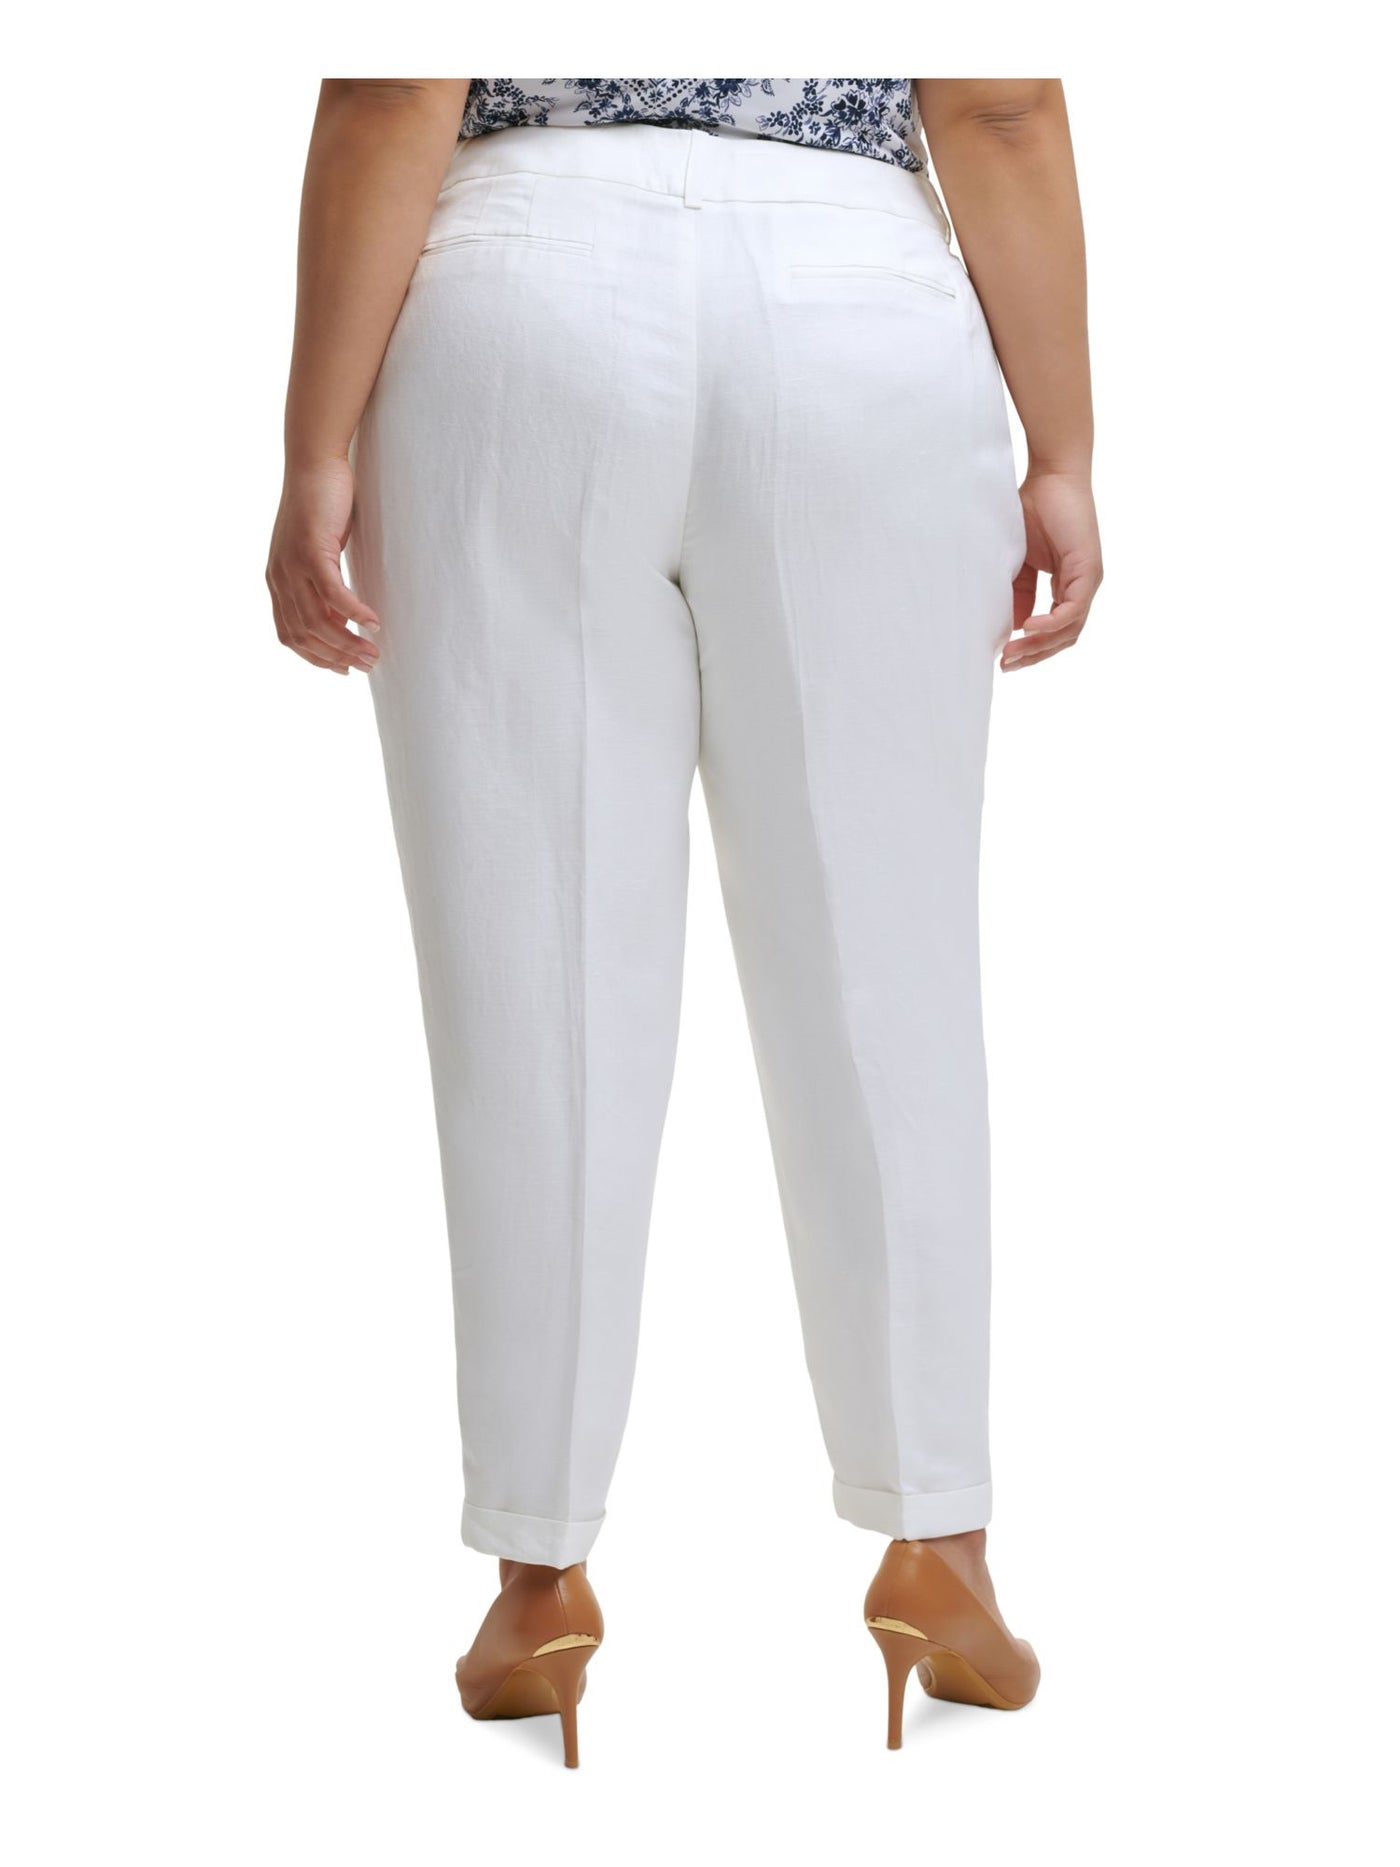 CALVIN KLEIN Womens White Zippered Pocketed Mid Rise Slim Leg Front-crease Wear To Work Cuffed Pants Plus 24W